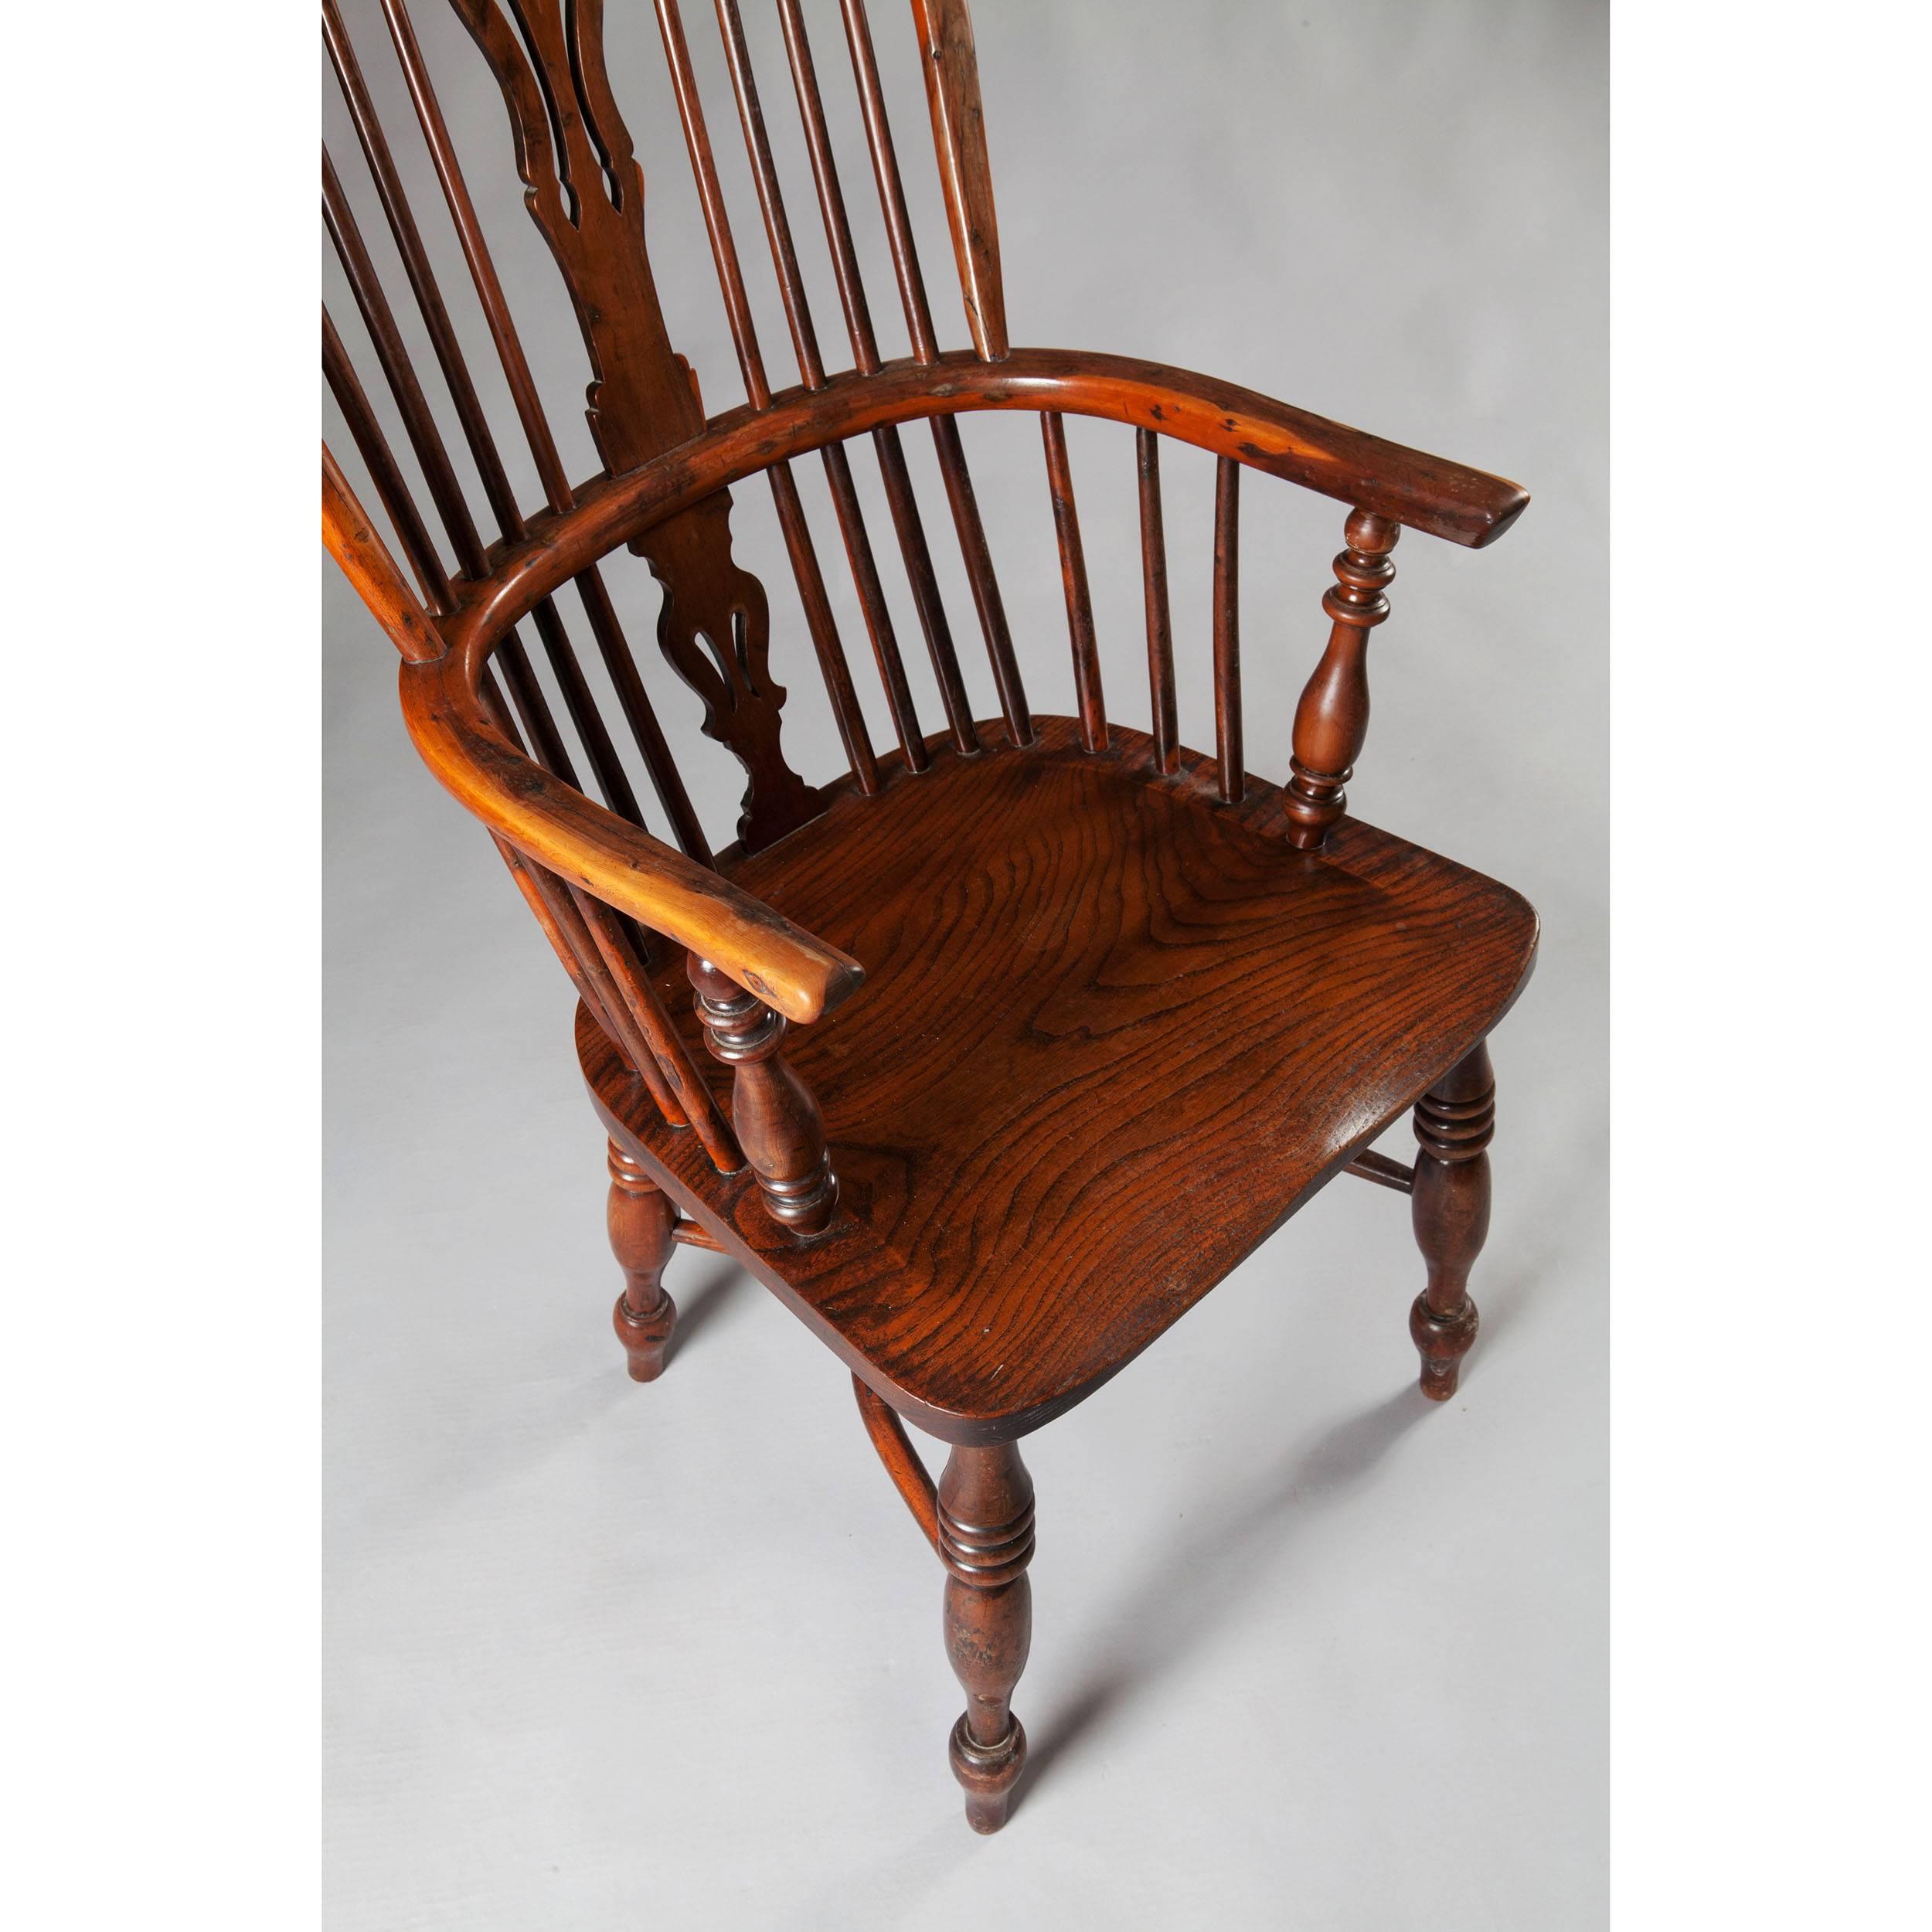 Early 19th century yew-wood windsor armchair with crinoline stretcher, well figured.

Measures: Height 110cm, 
width 52cm,
depth 52cm,
seat height 45cm.

The windsor chair is established as one of the great classics of English country